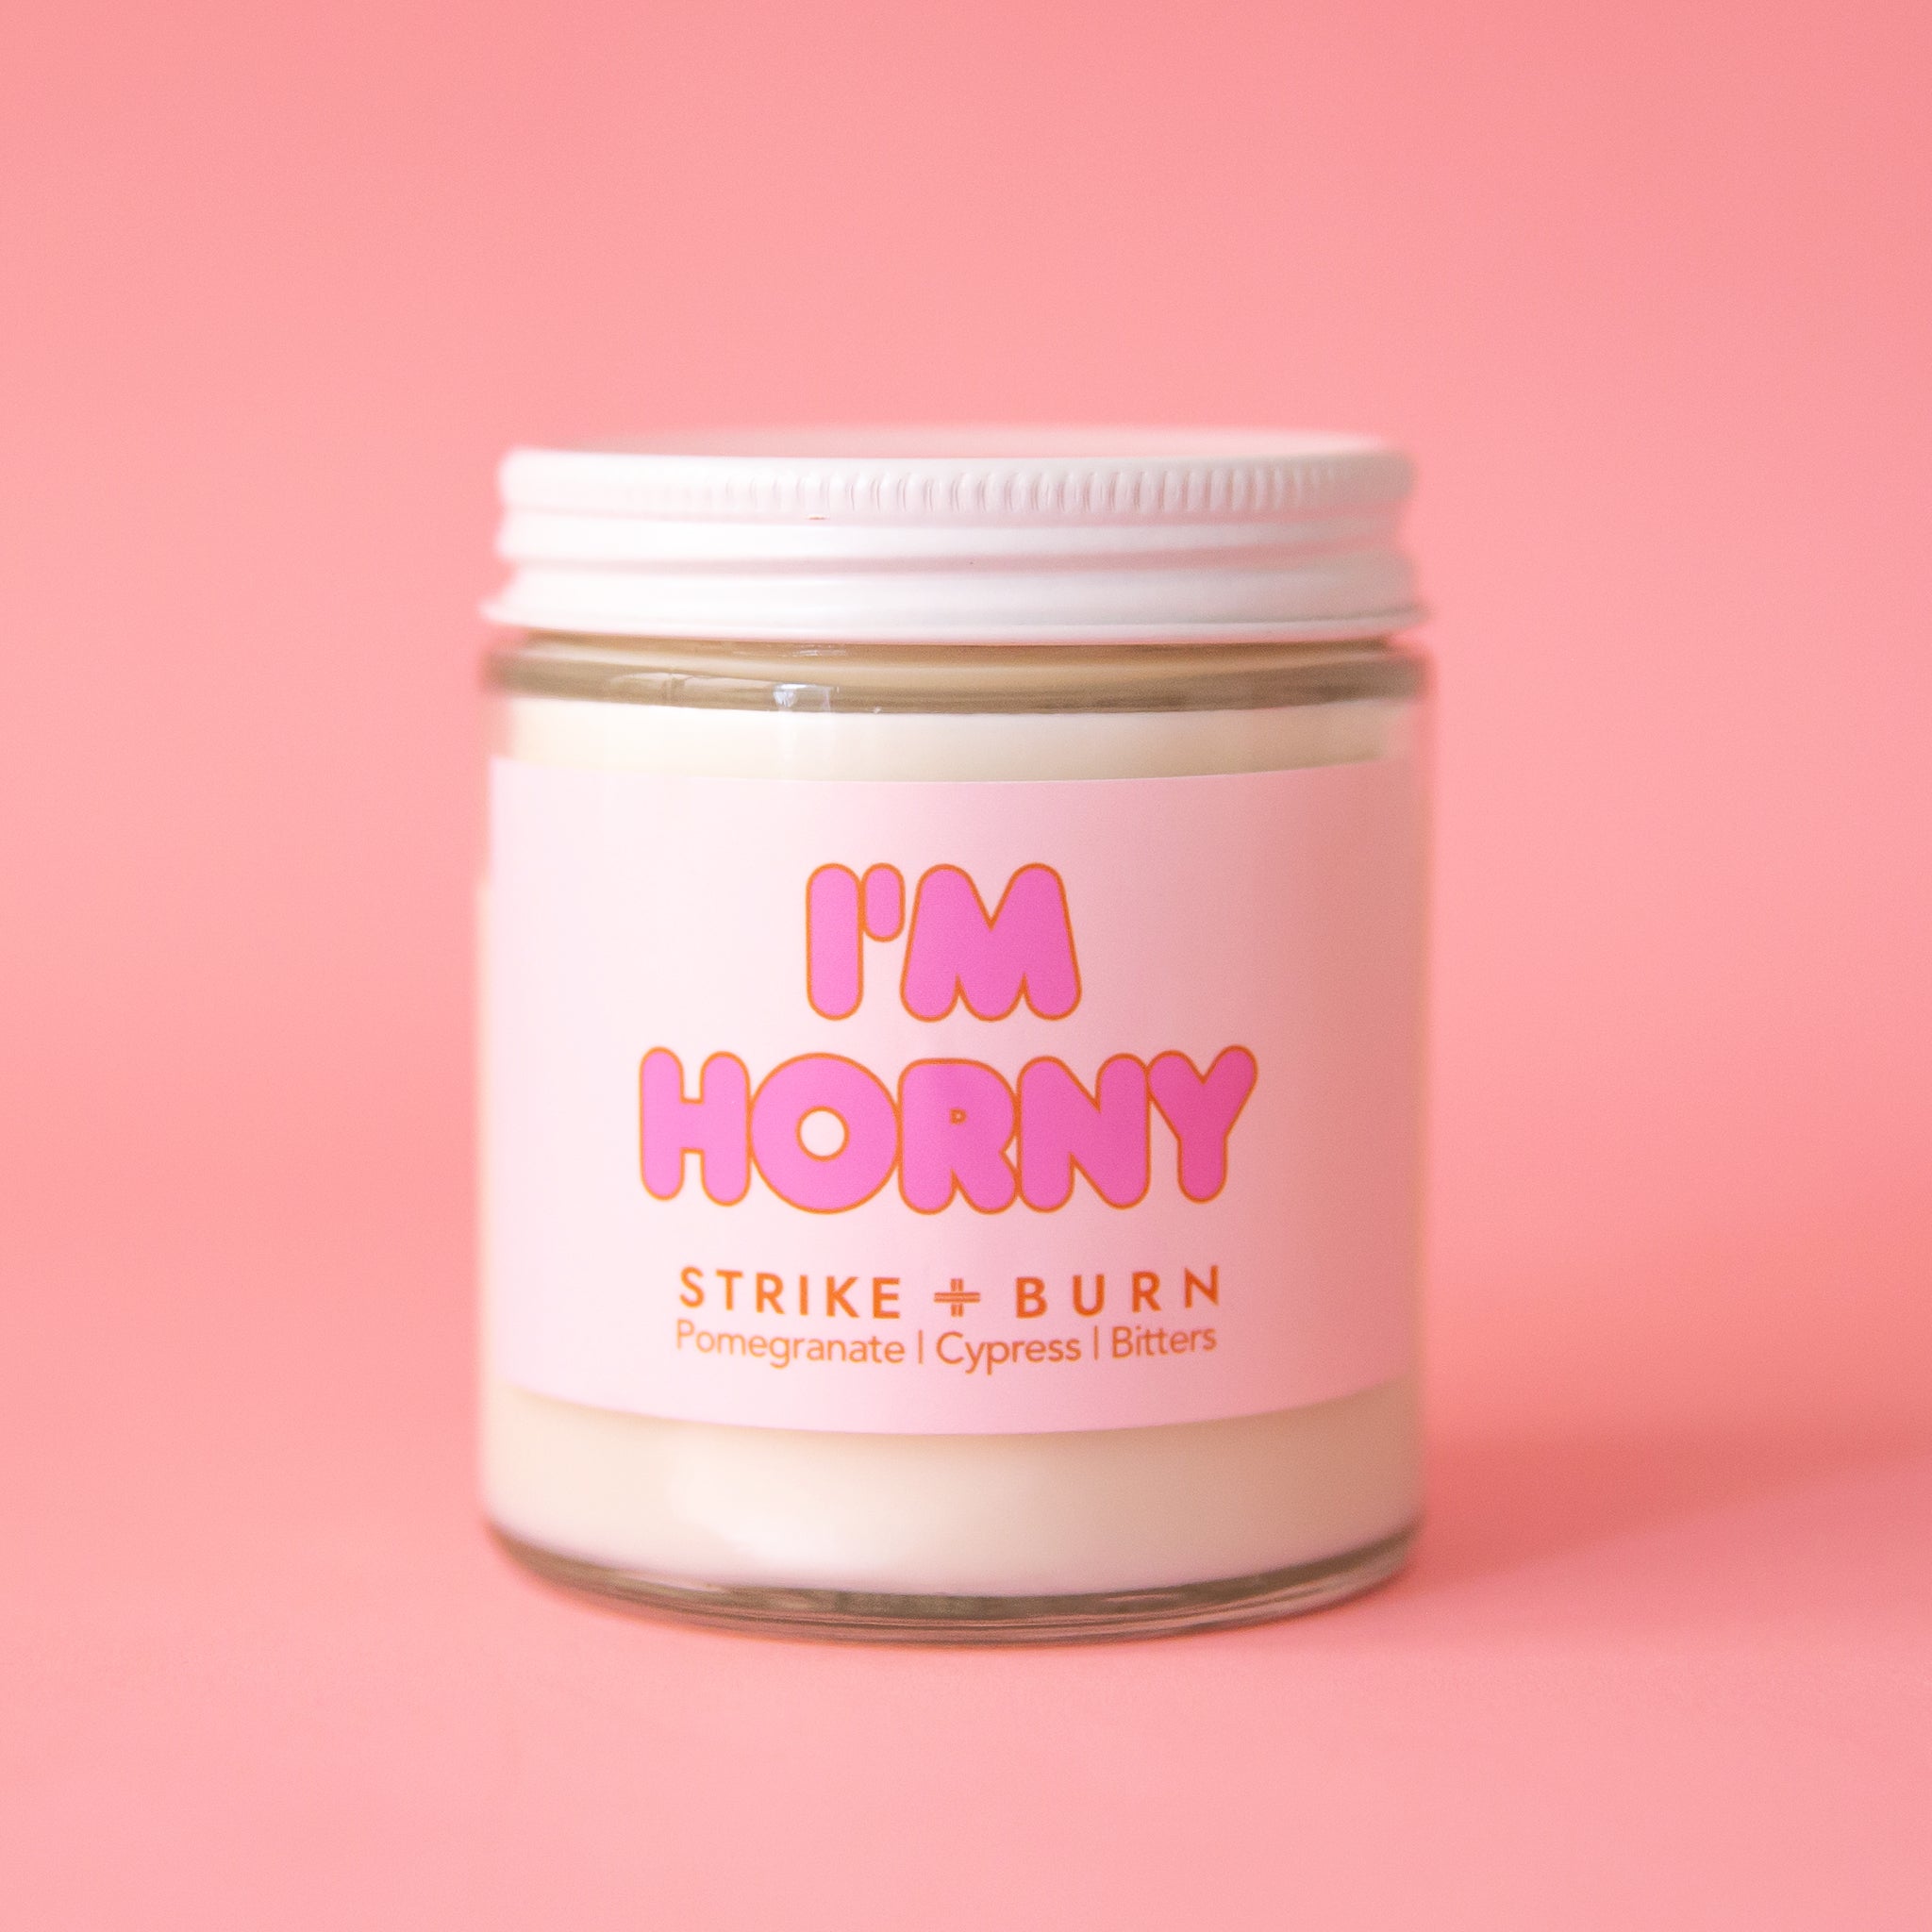 On a pink background is a clear glass jar candle with a lid and label that read, "I'm Horny". 